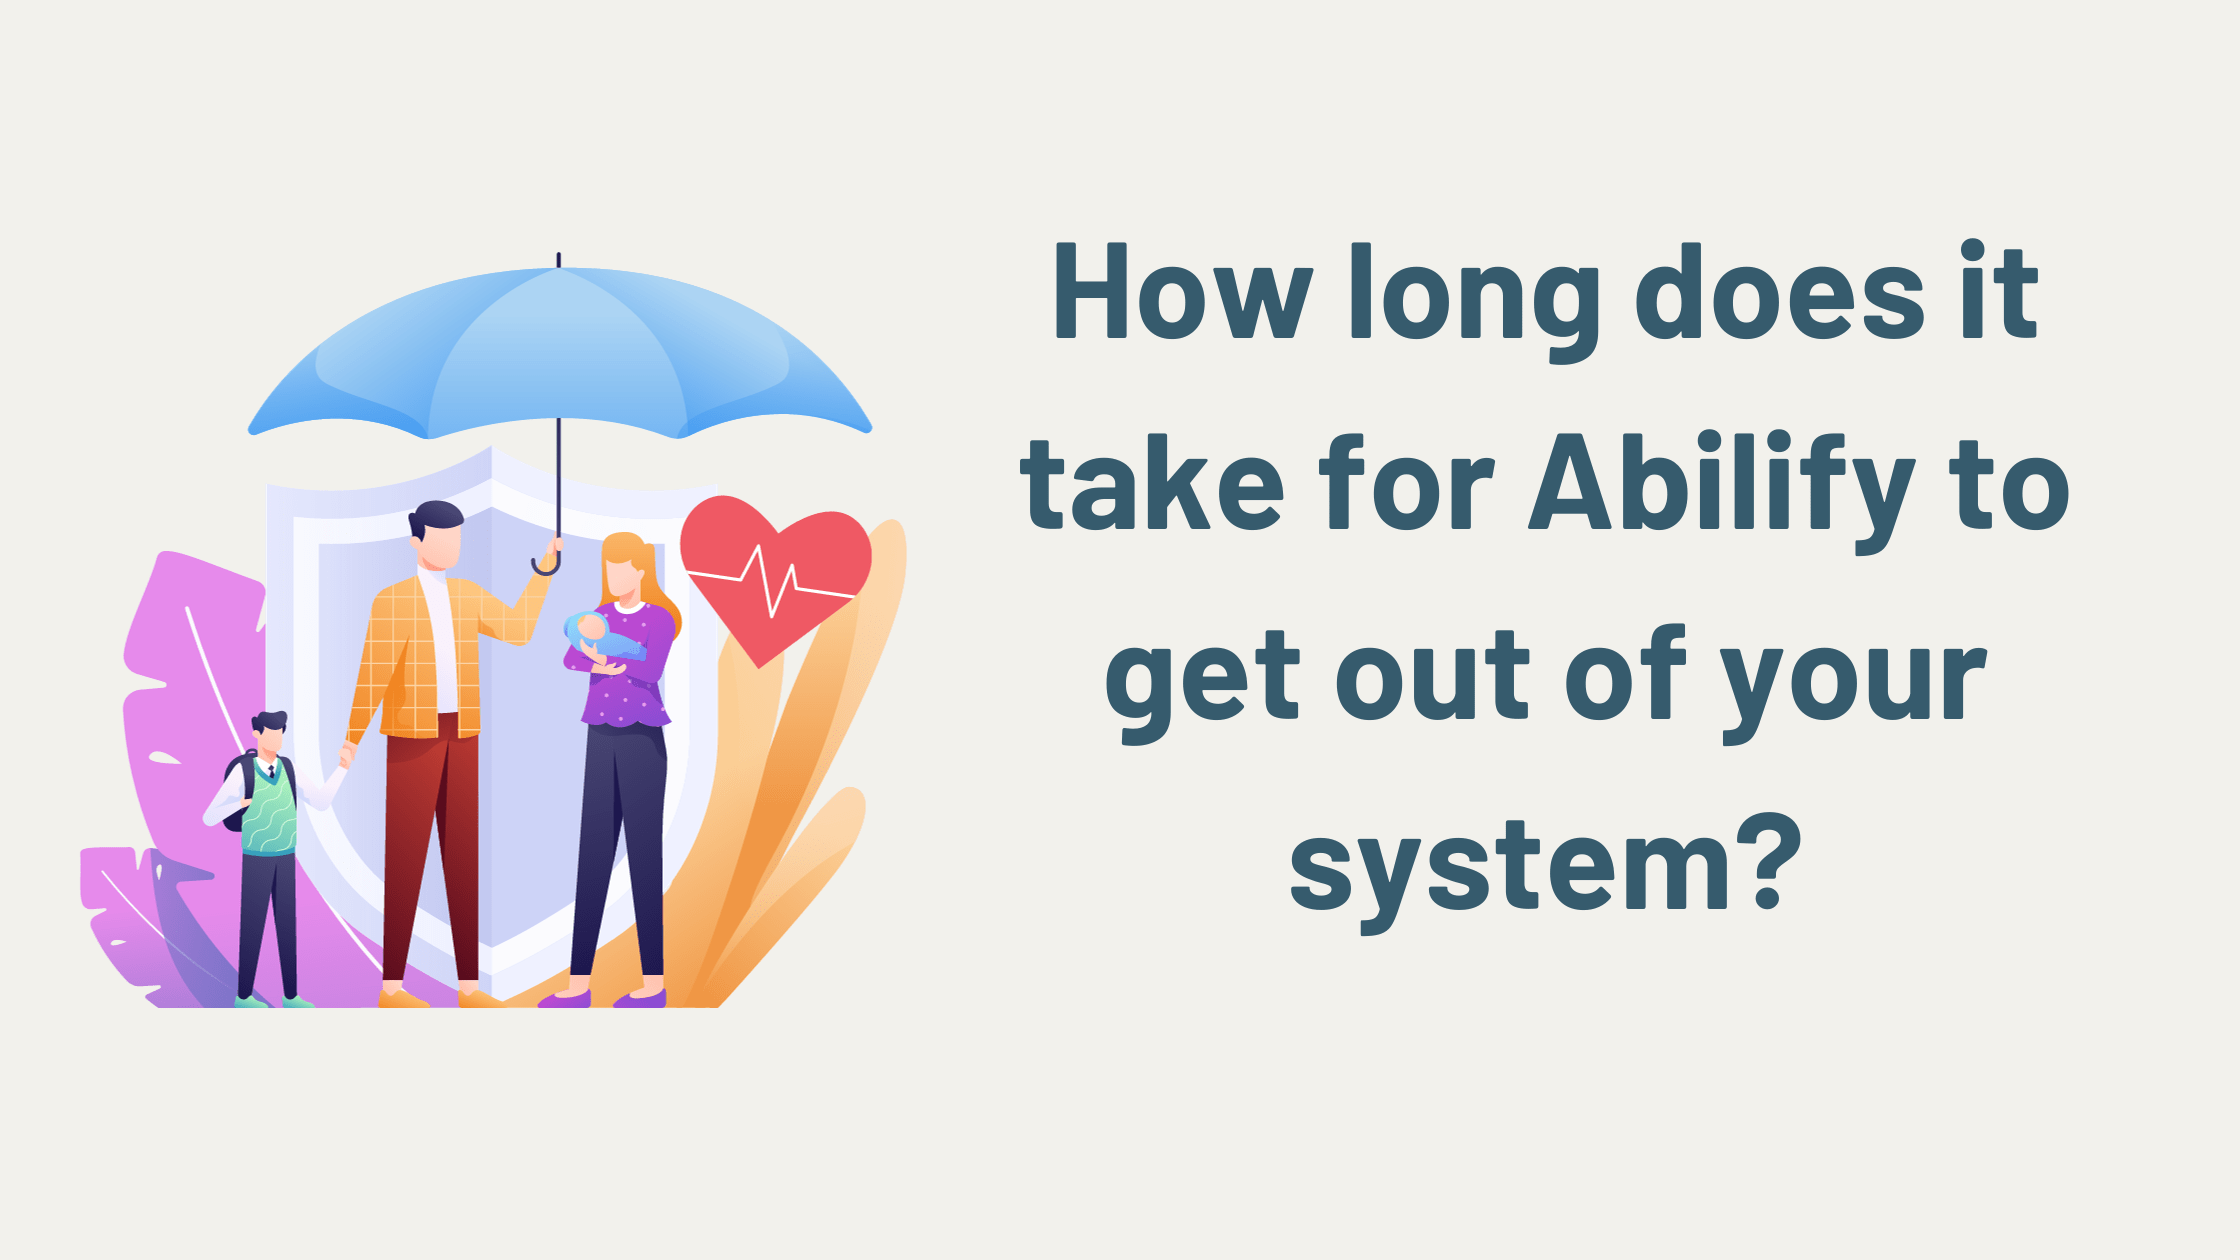 How long does it take for Abilify to get out of your system?